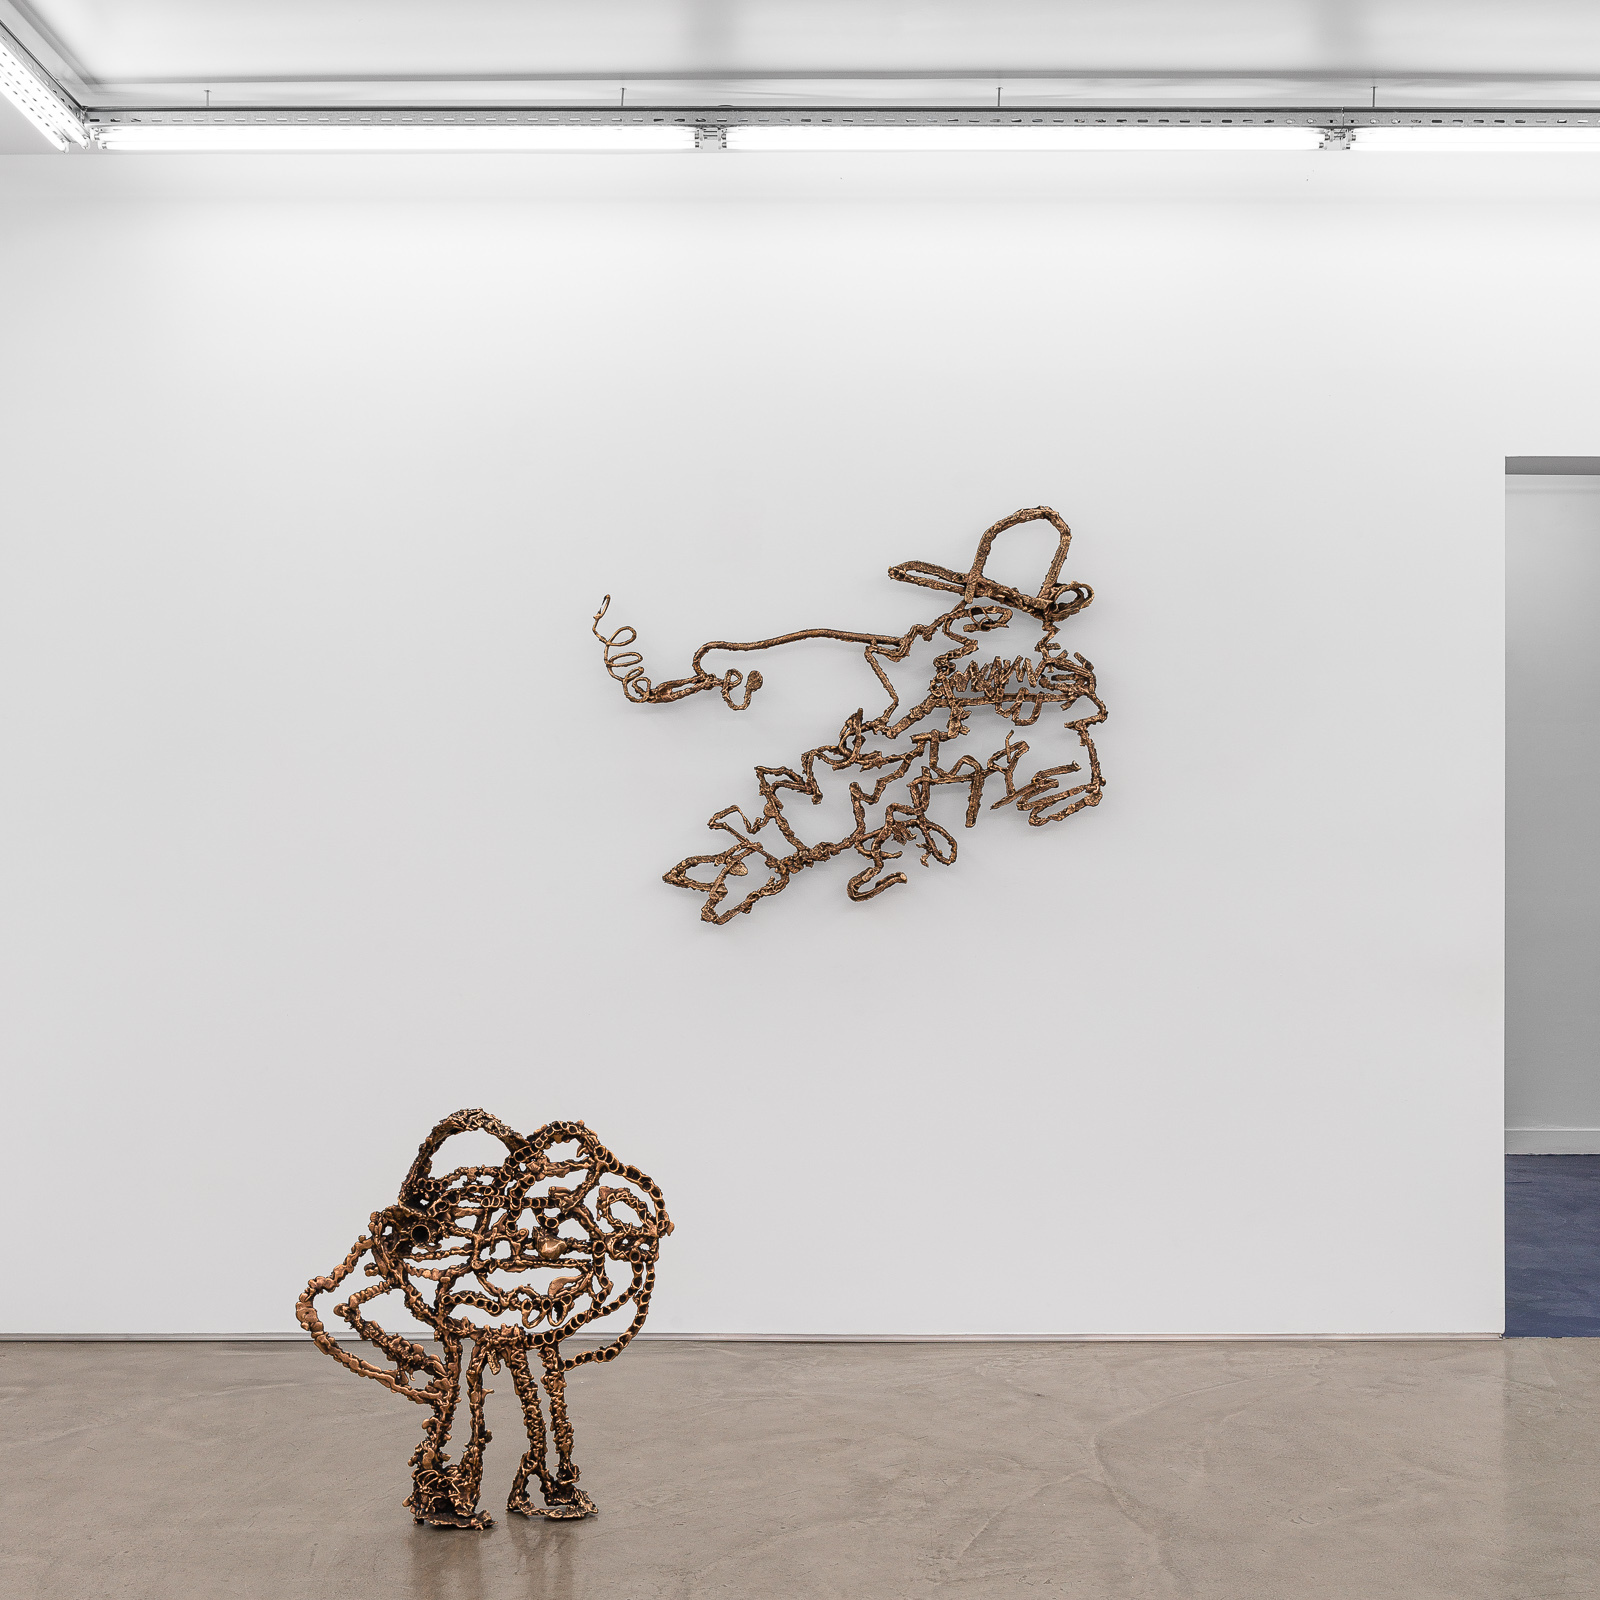 Exhibition view "Nobody Move" by Simone Zaccagnini at Galerie Derouillon, Paris, September 2021